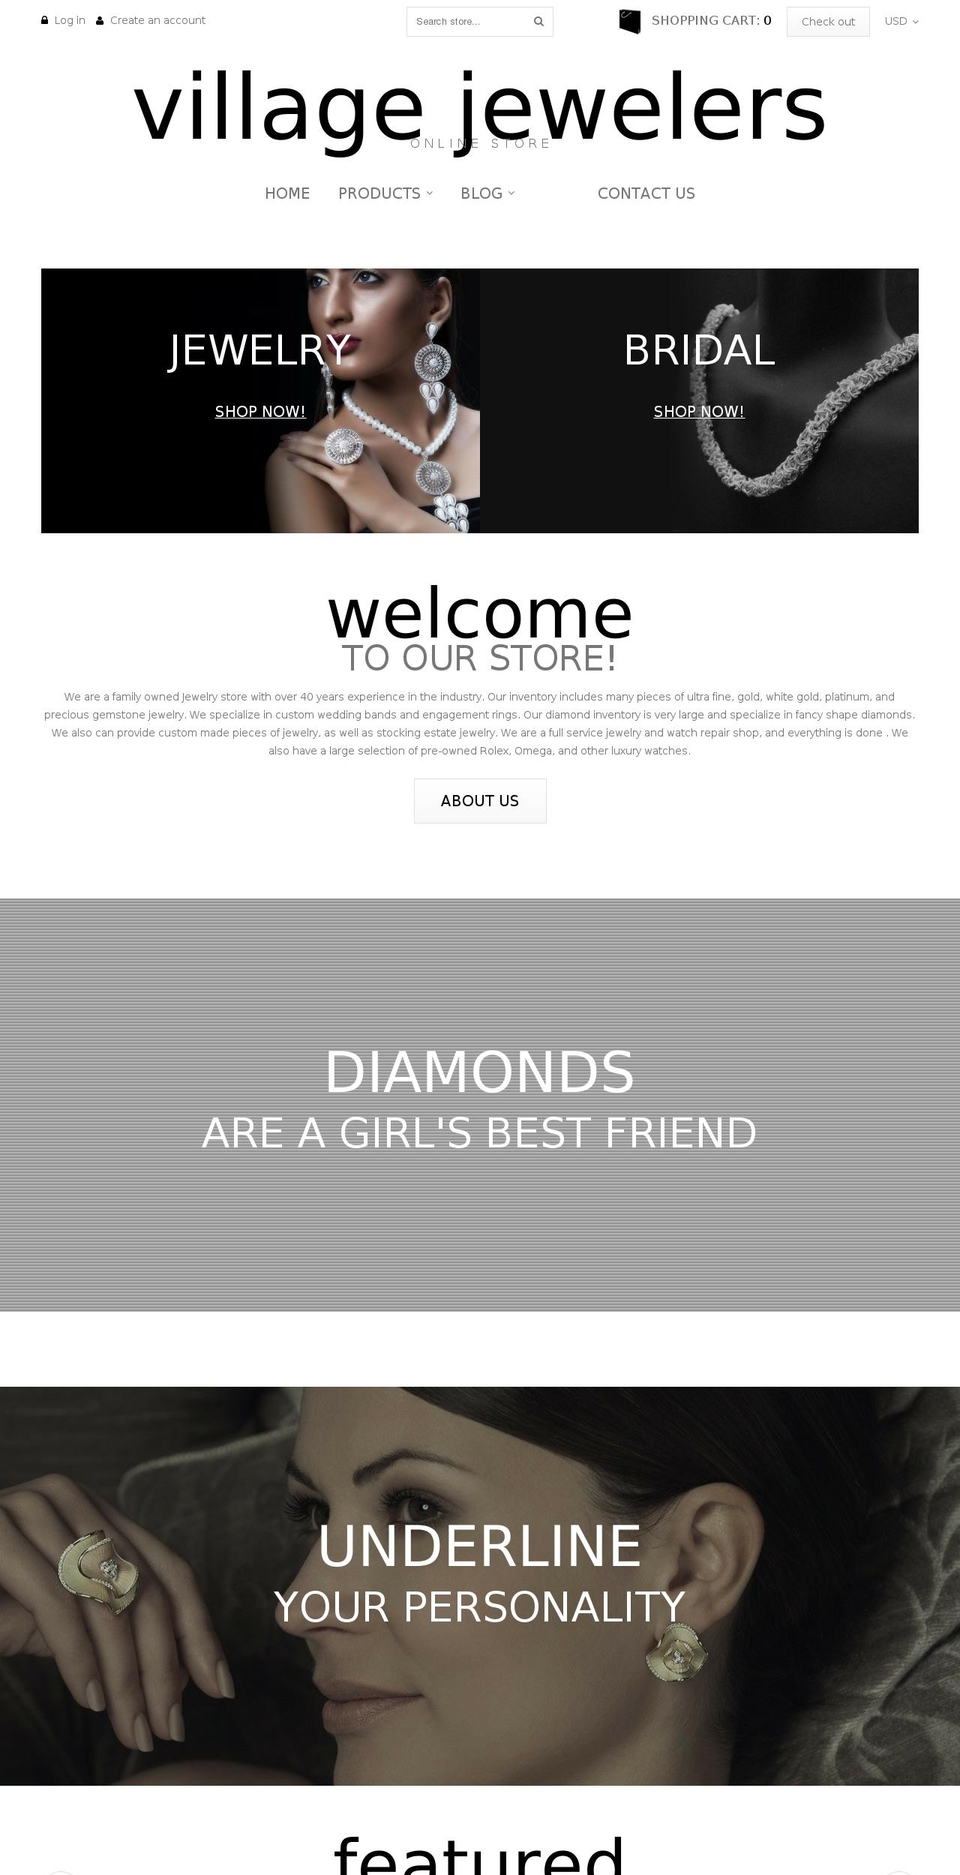 Minion Shopify theme site example villagejewelersny.com